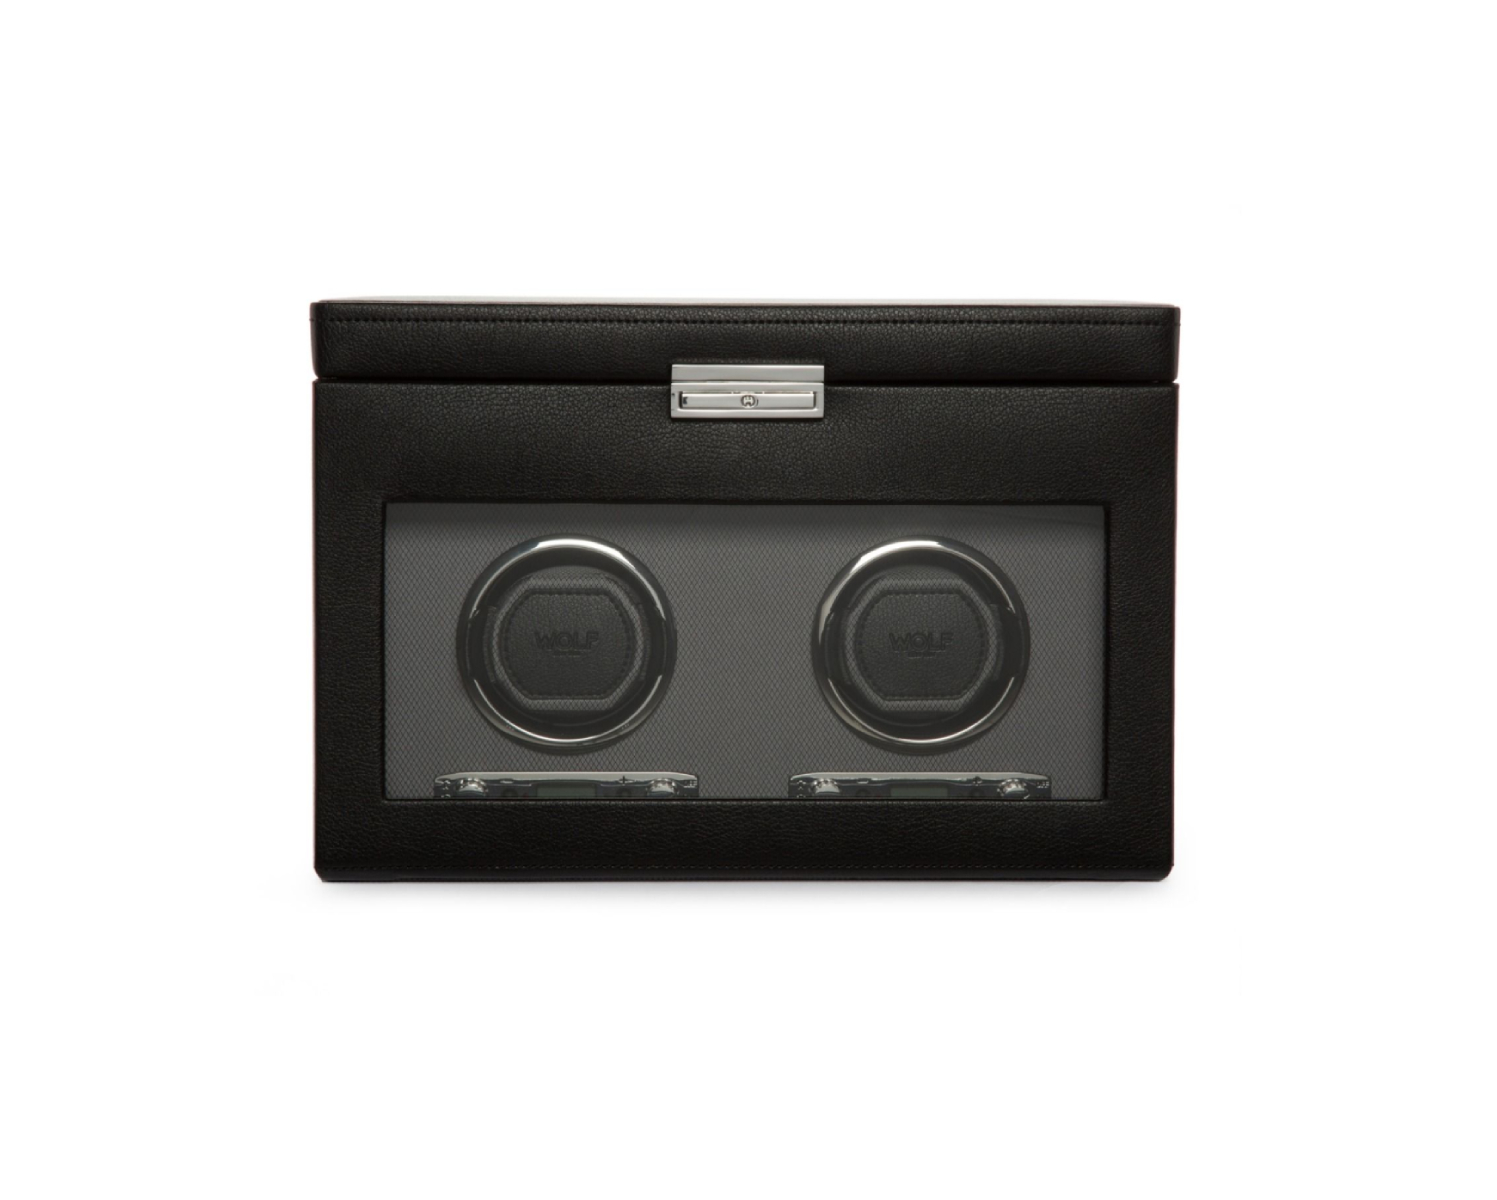 Viceroy DoubleWatch Winder With Storage